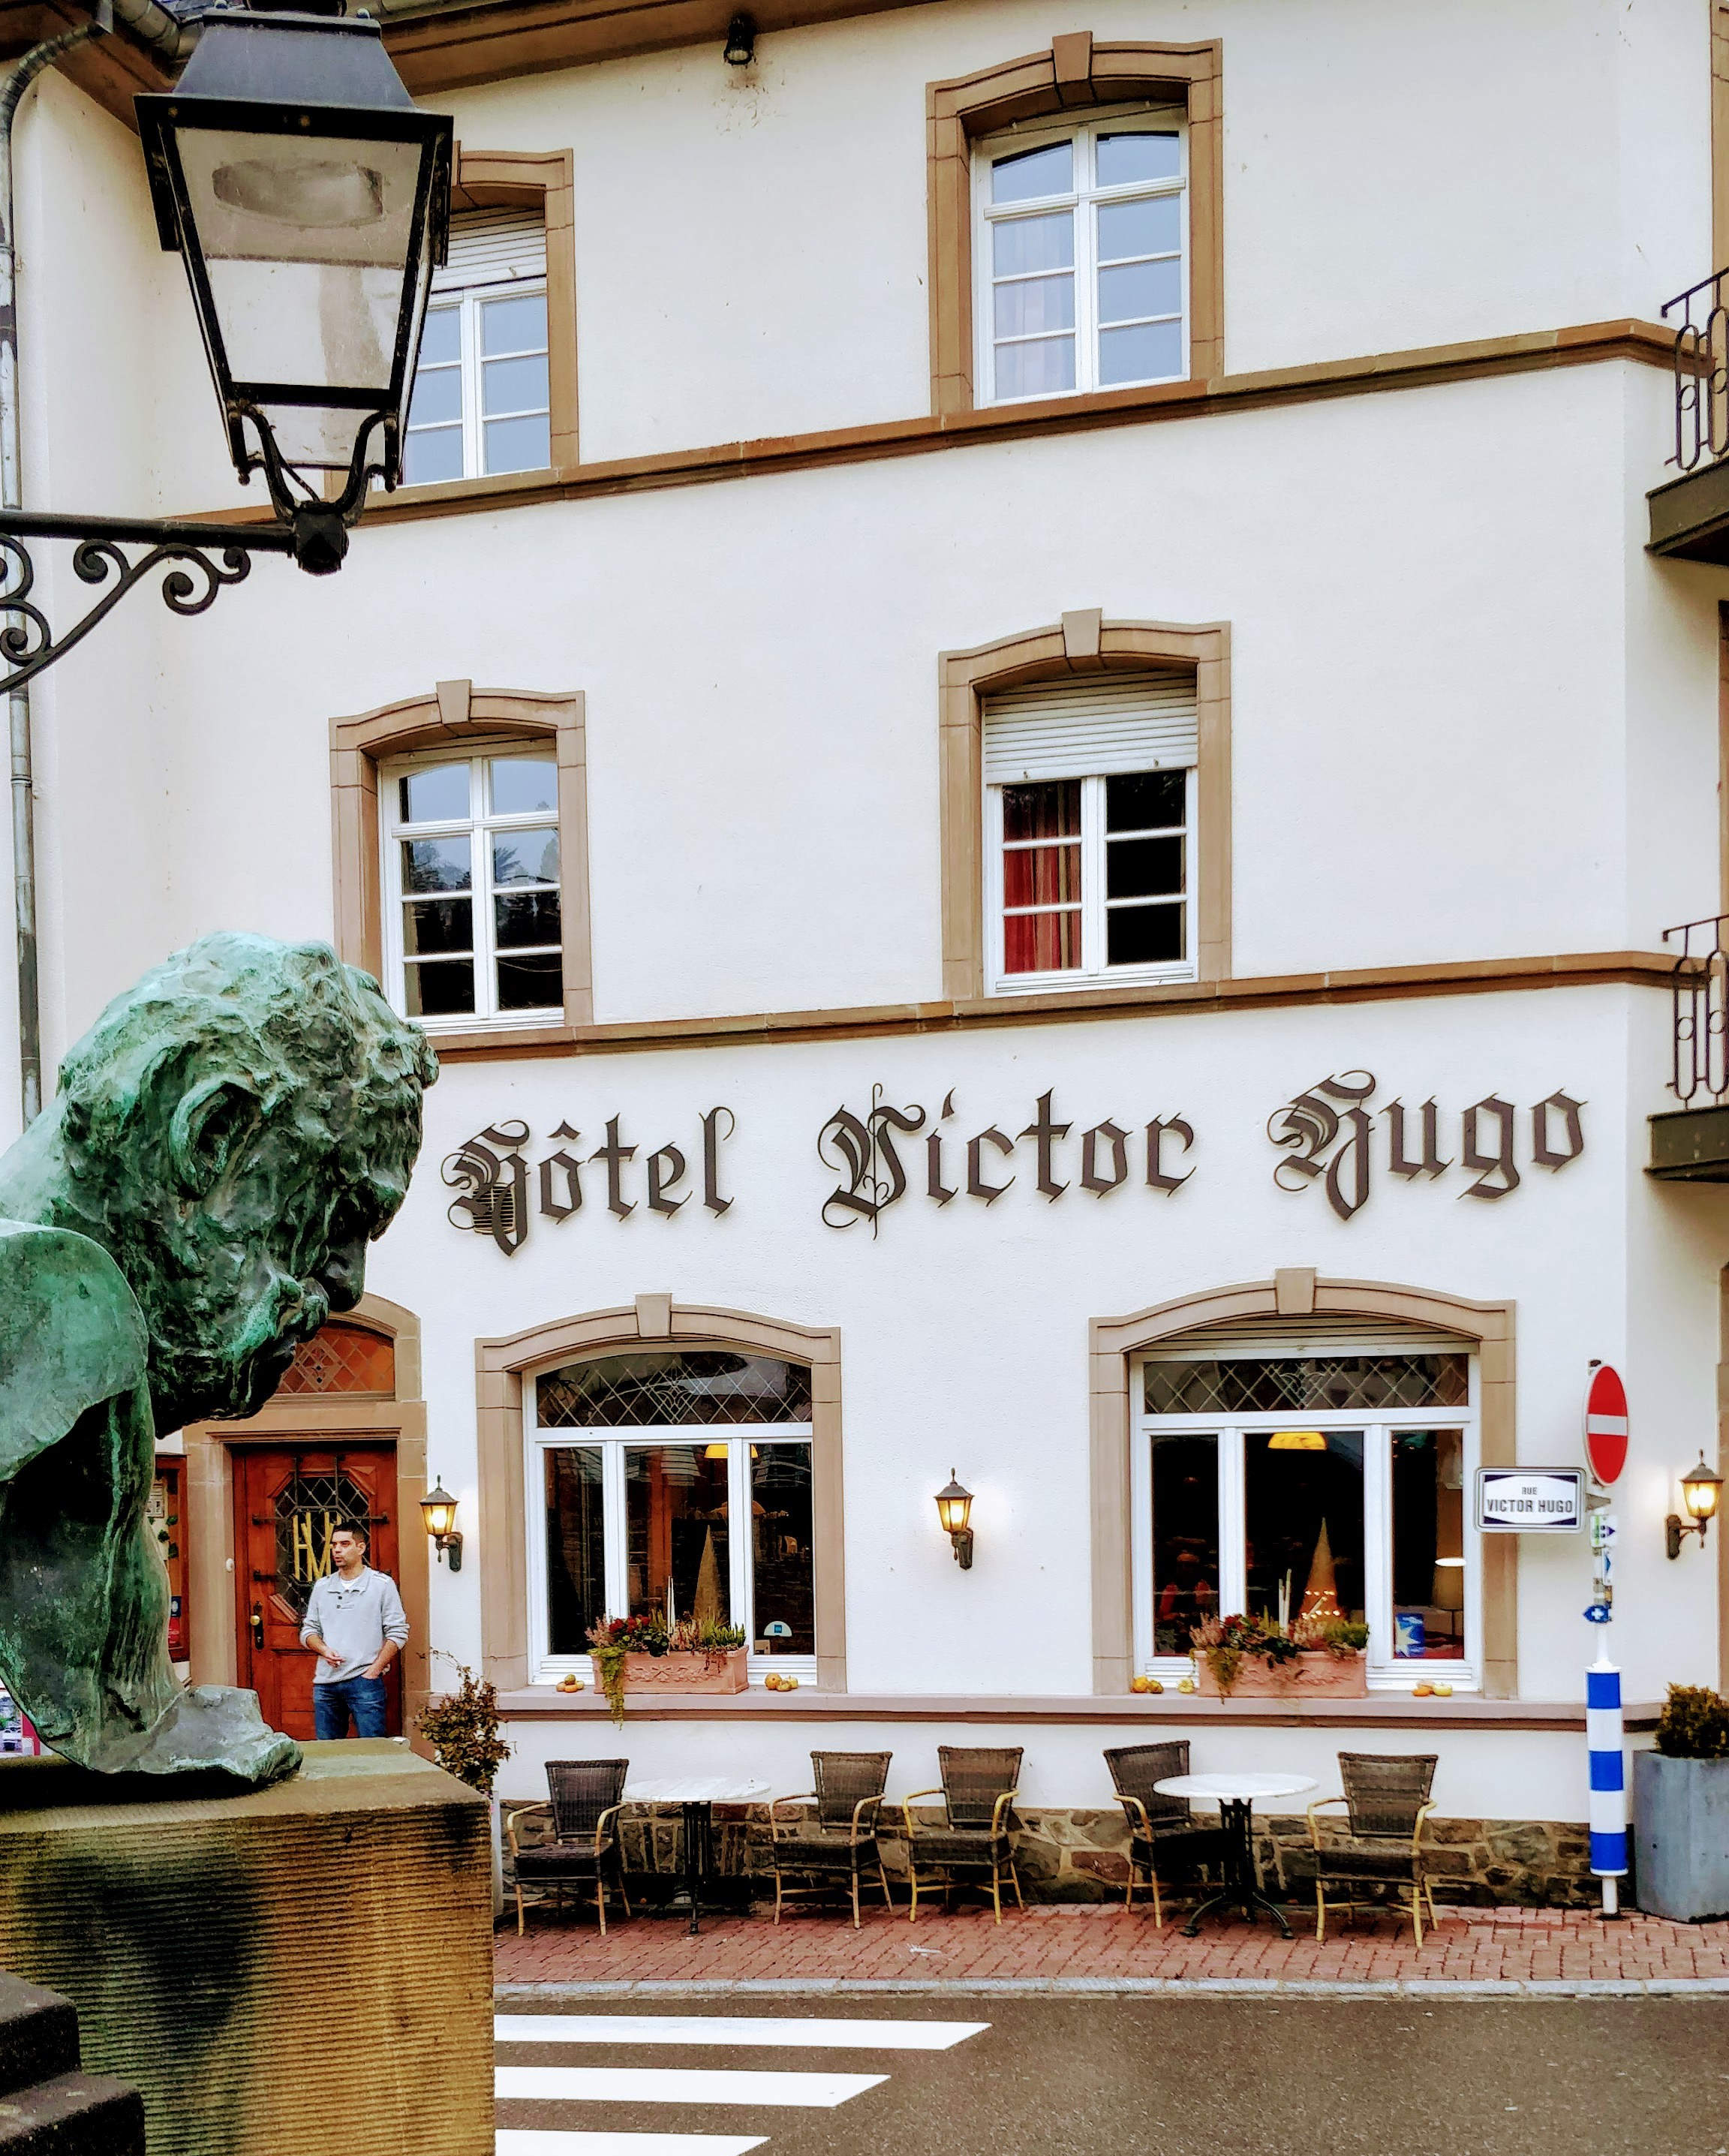 Victor Hugo bust and hotel